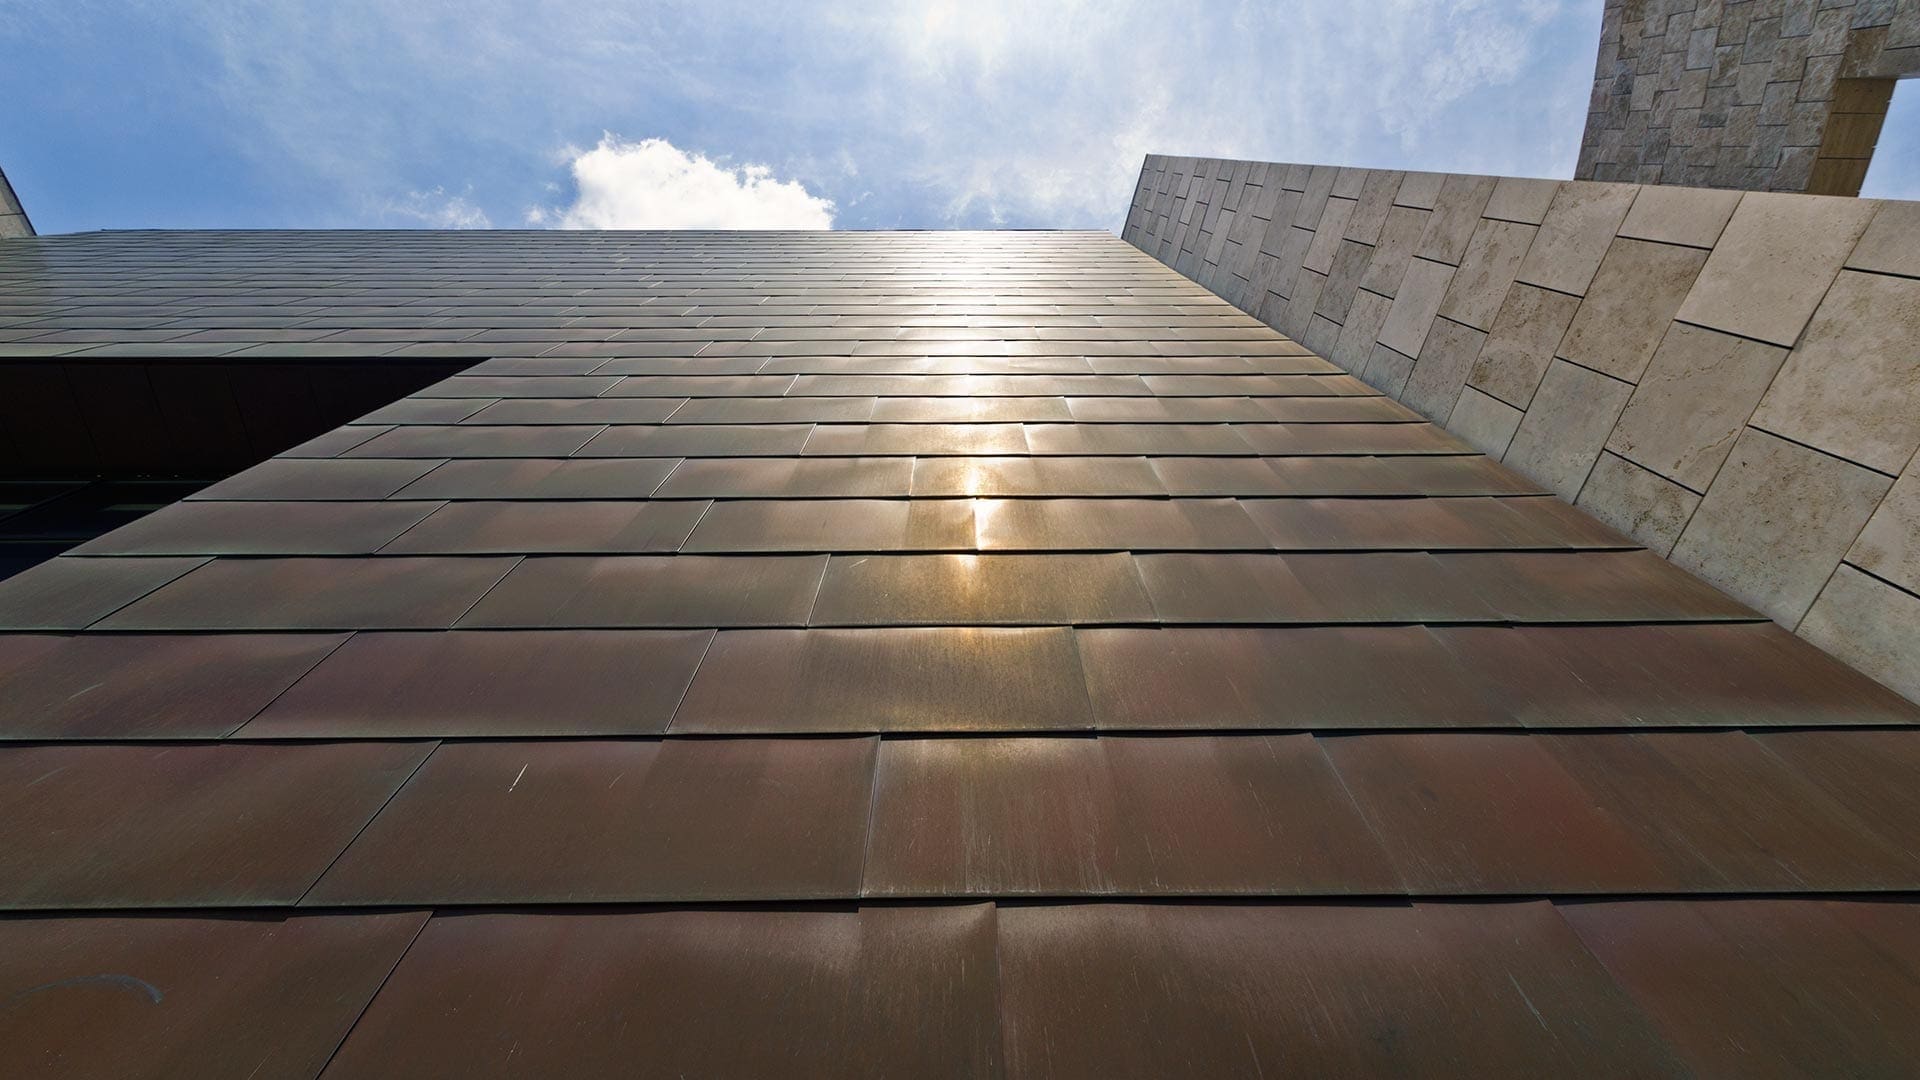 Upward view of the Freedom Center copper panels which have aged do a dark red-brown